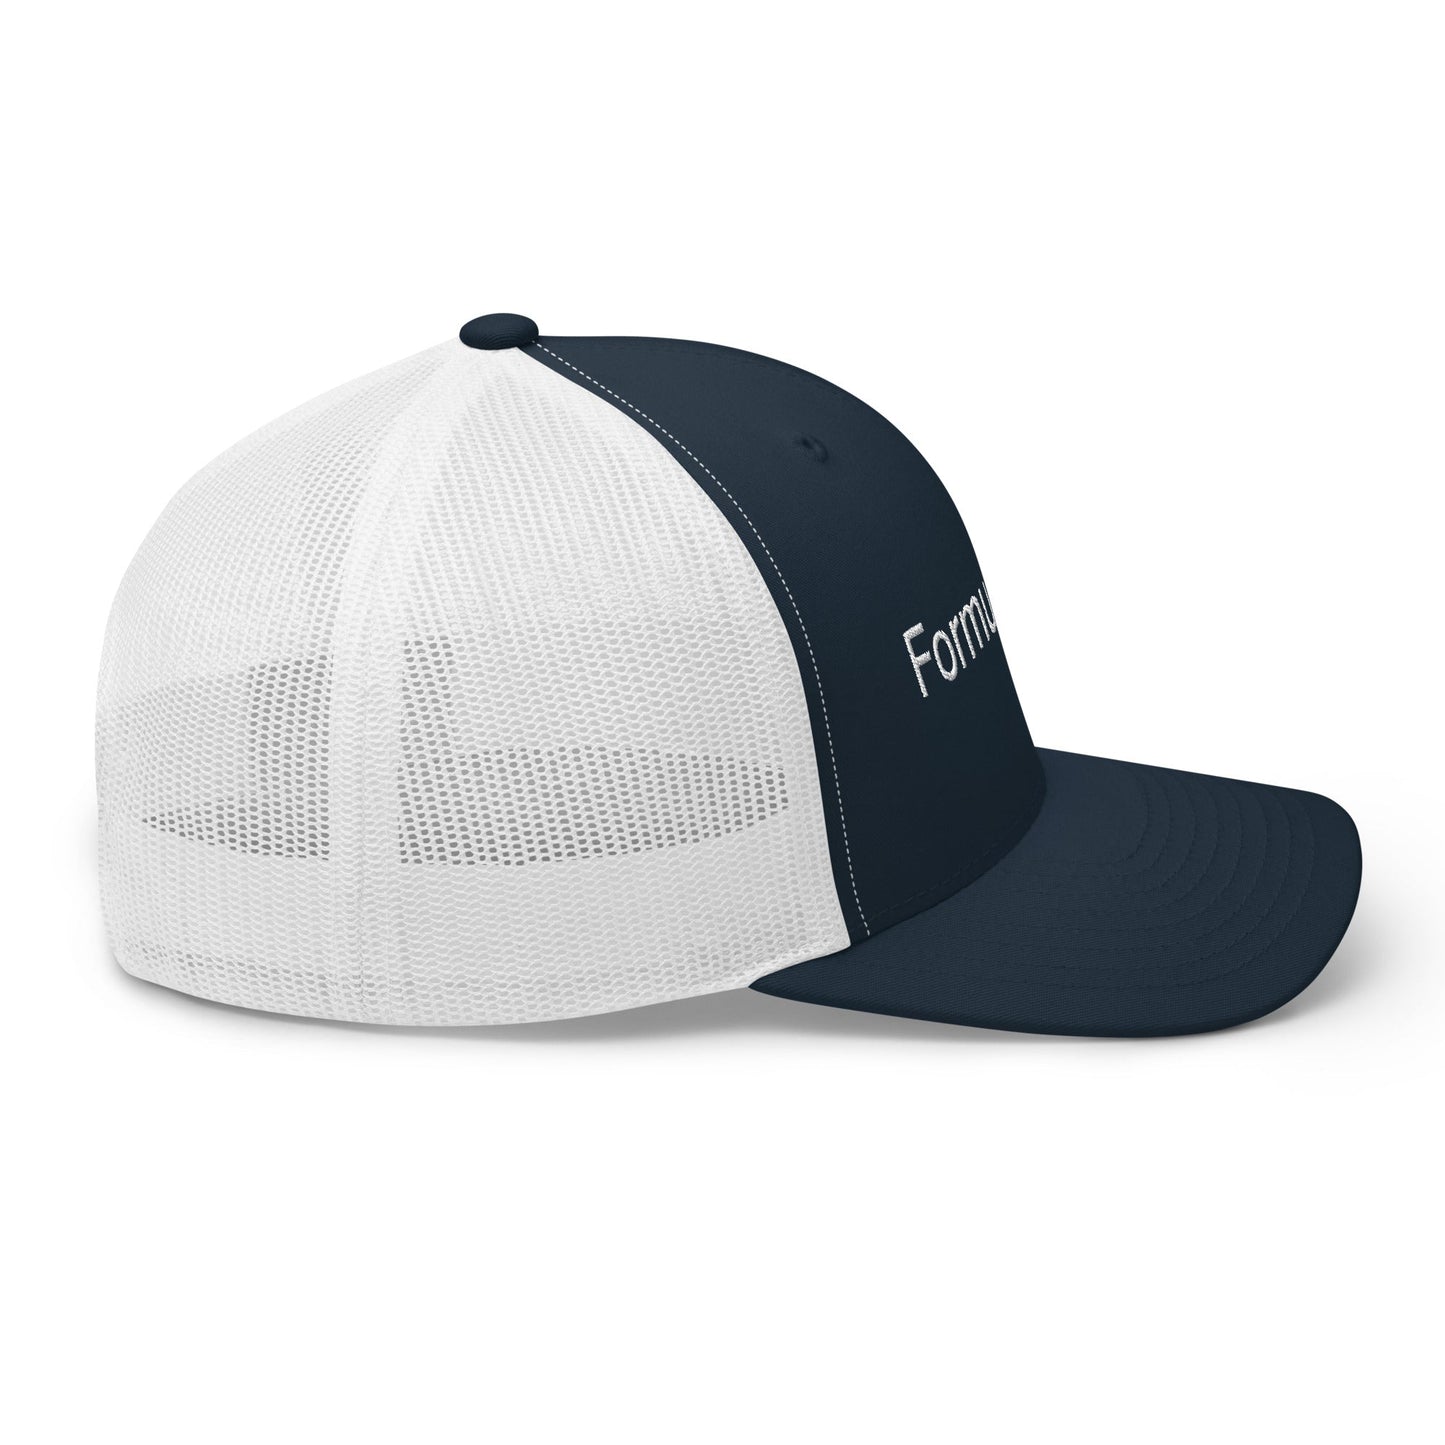 FORMULA FORD Official Embroidered Trucker Cap - Navy/white